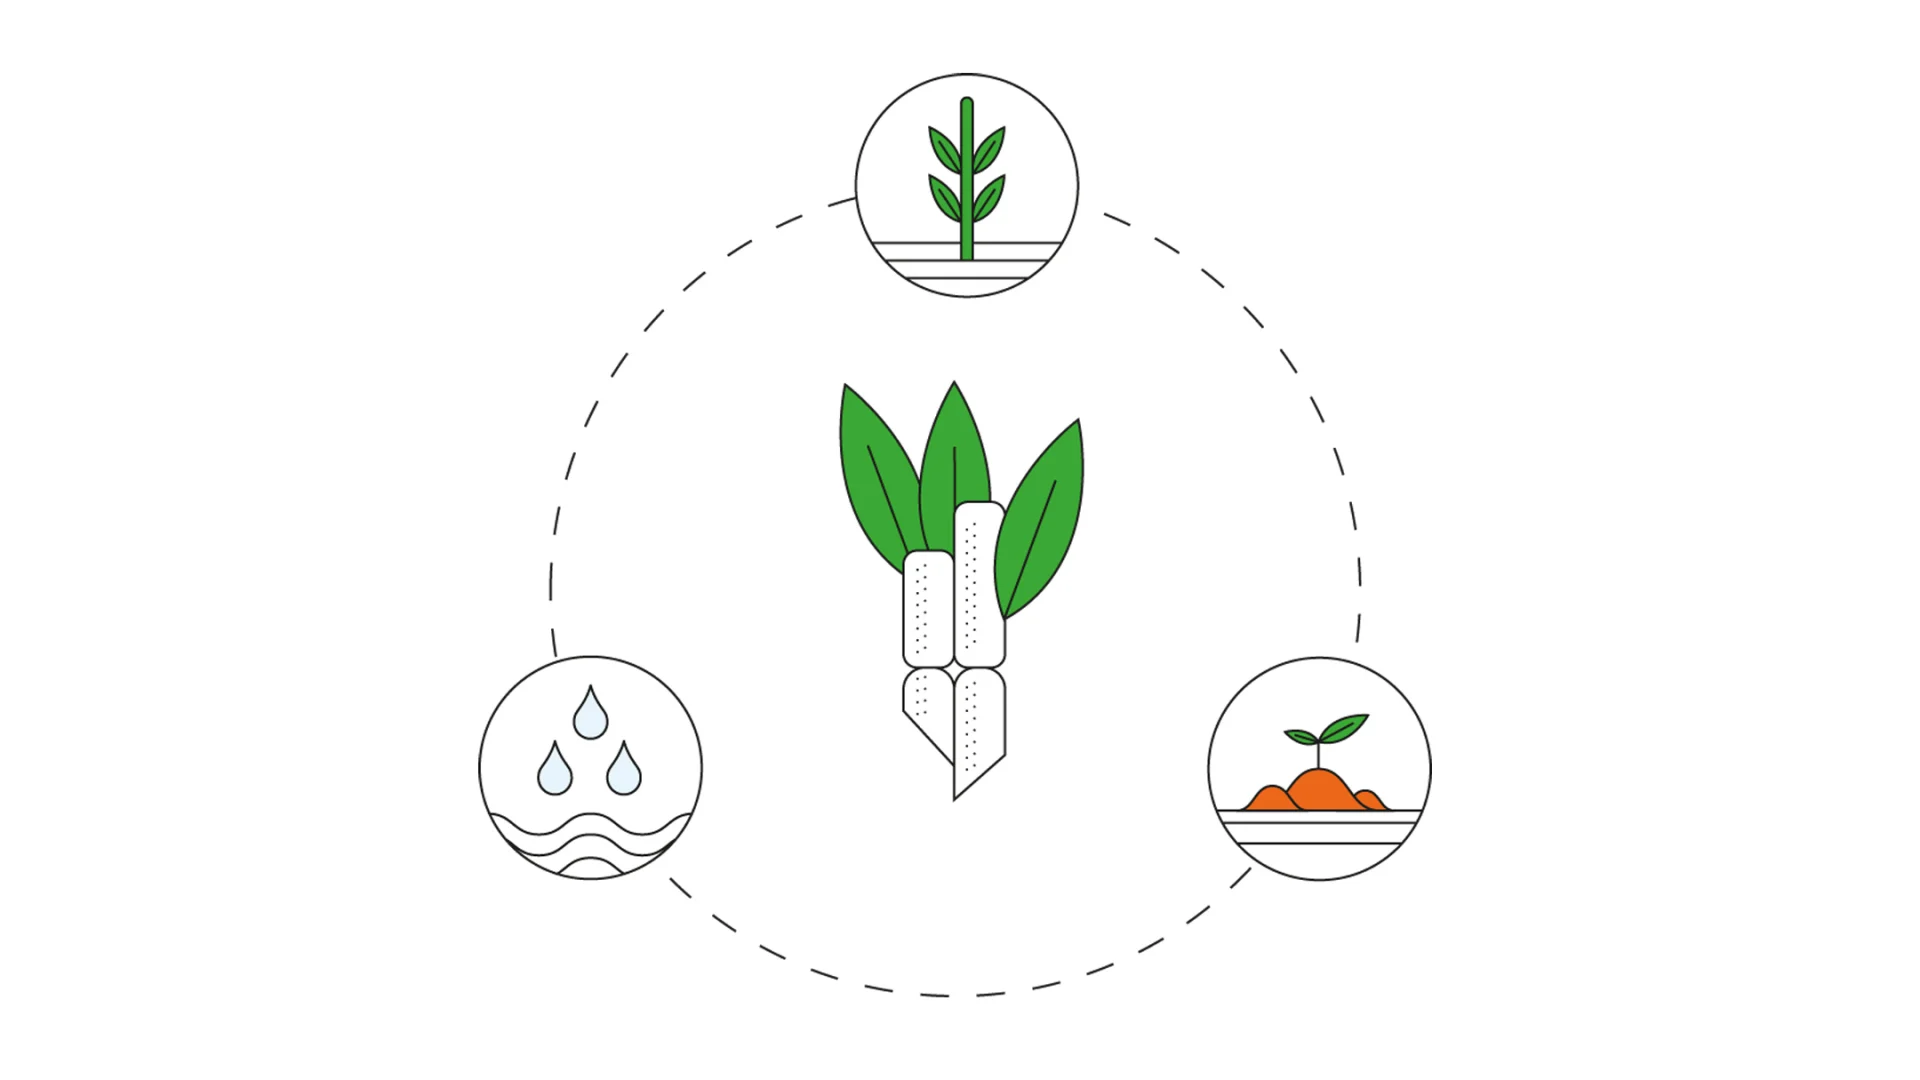 The illustration shows a cycle with three stages. The first features a young plant, the second a fully grown plant and the third falling rain.